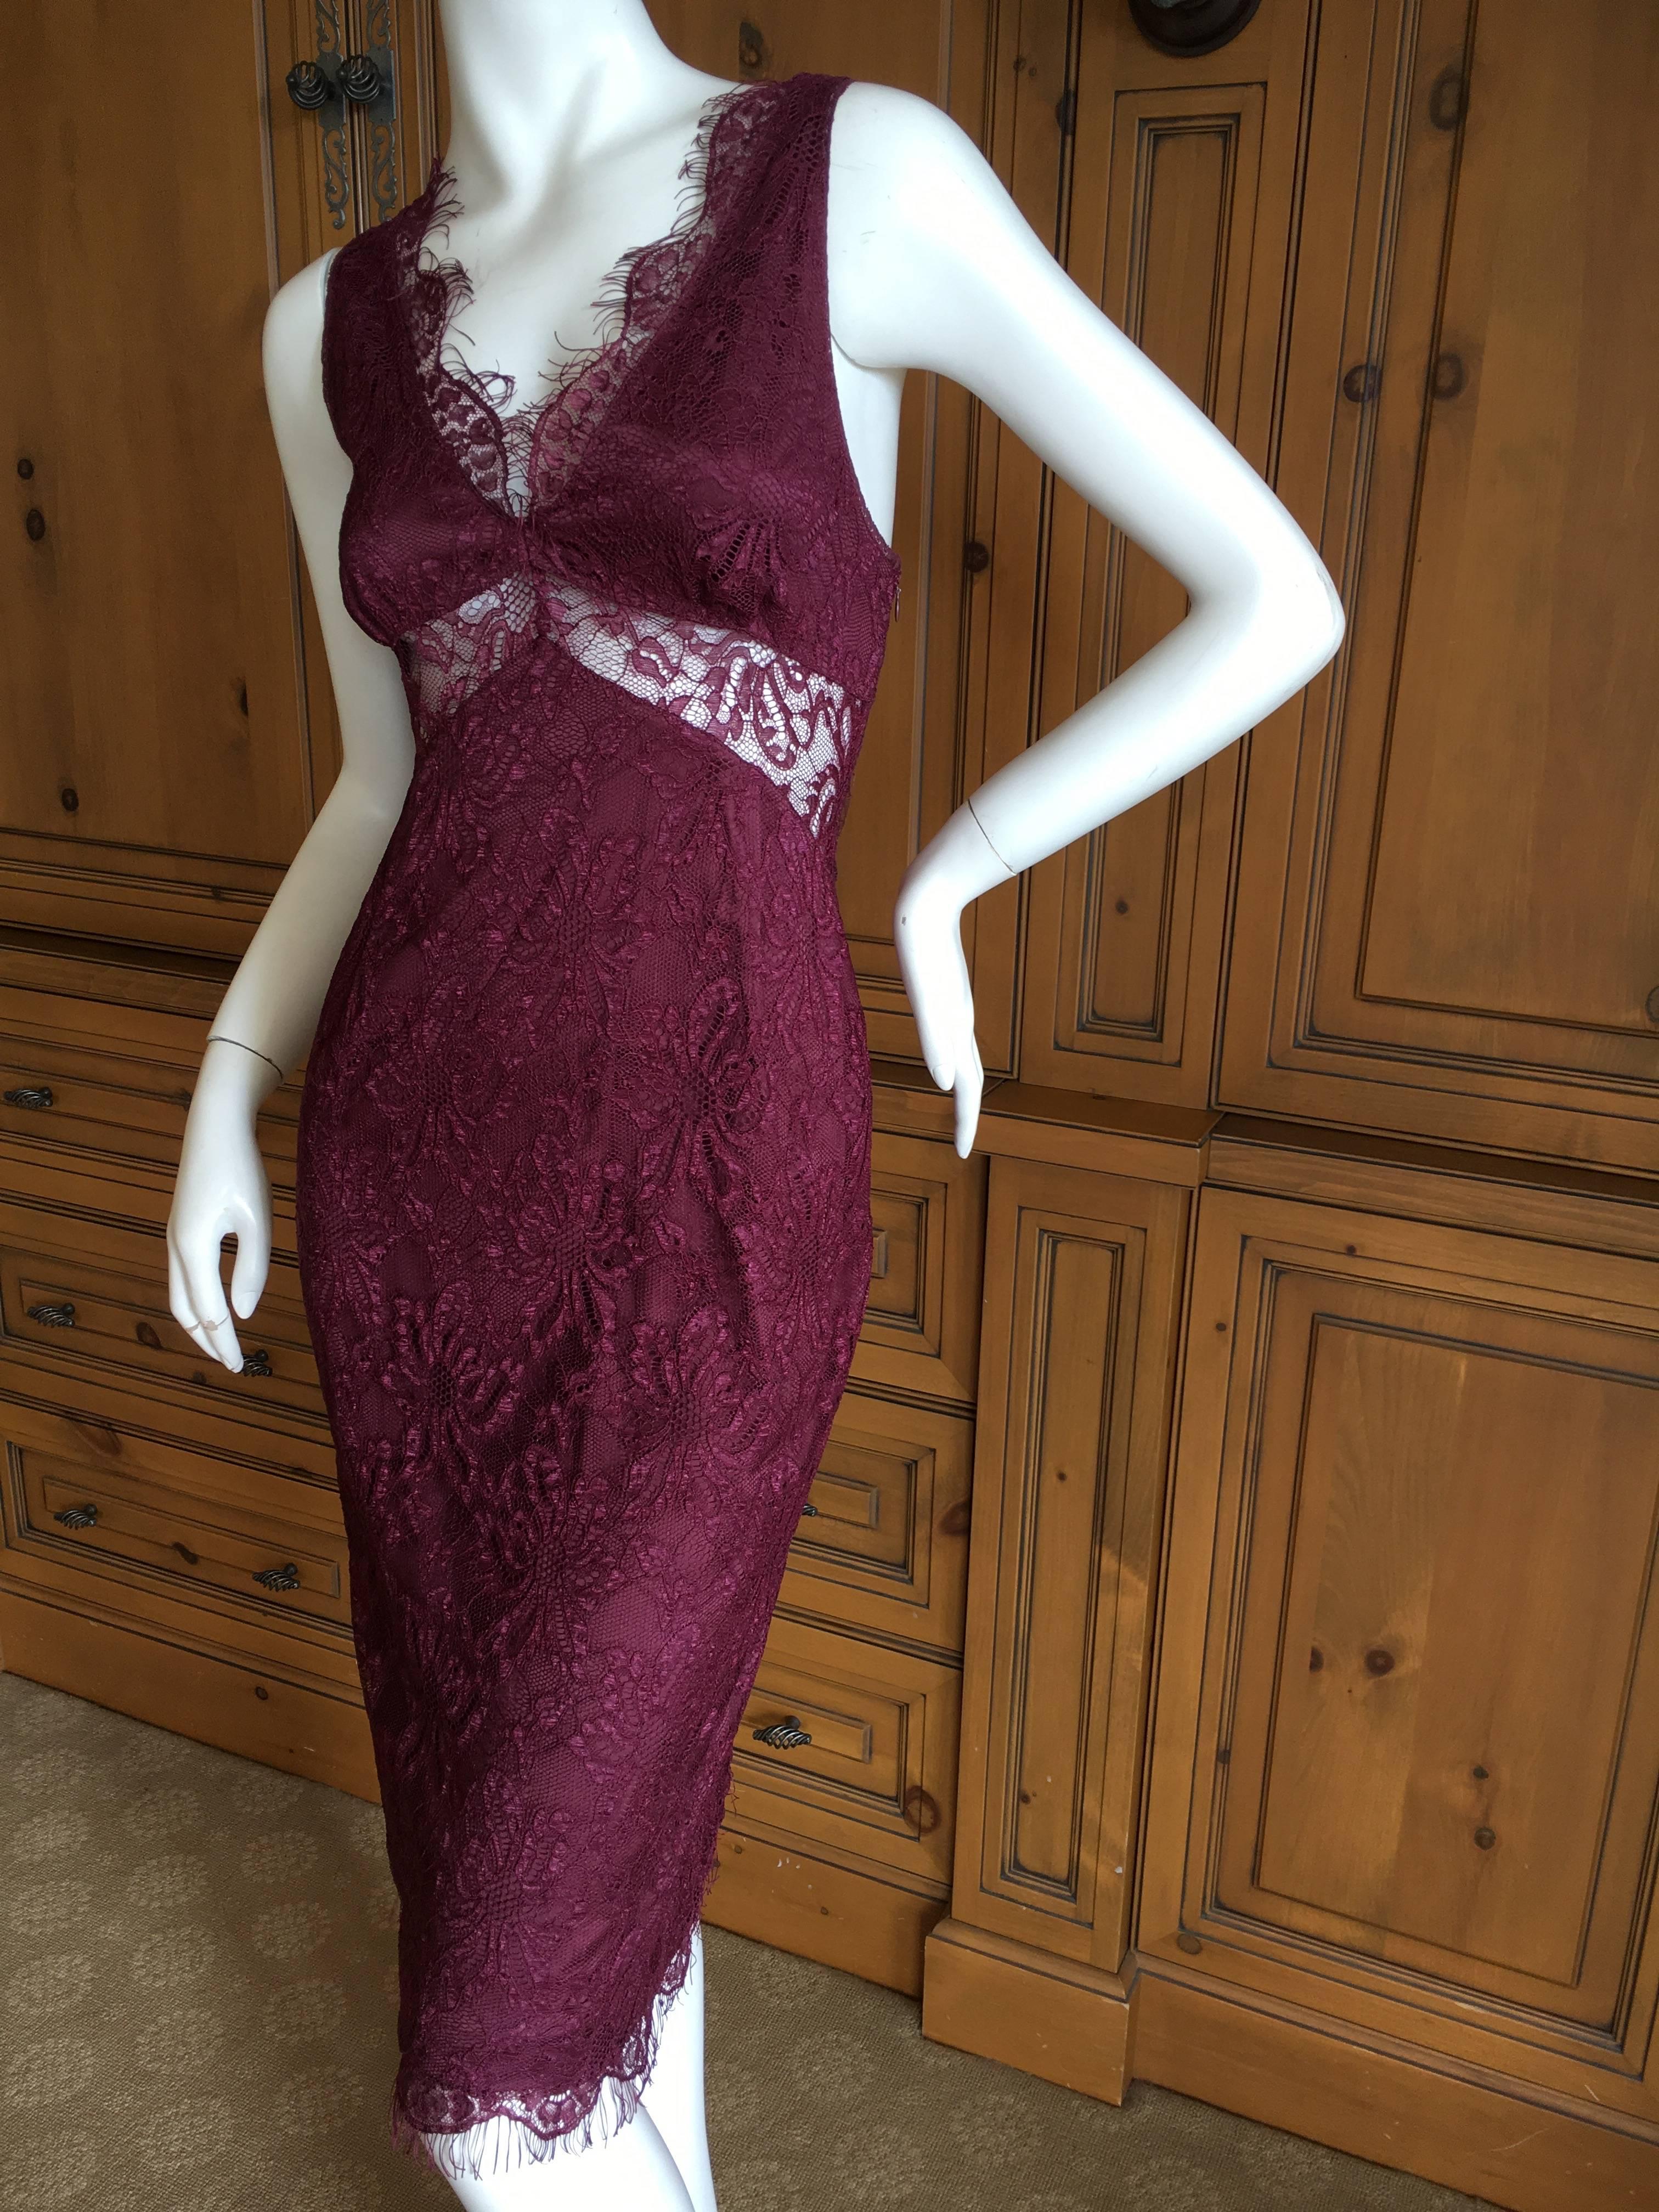  D&G Dolce & Gabbana Vintage Lace Overlay Sheer Cocktail Dress.
This is so pretty, with a sheer lace back.
Size 44
Bust 39"
Waist 28"
Hips 40"
Length 44"
Excellent condition